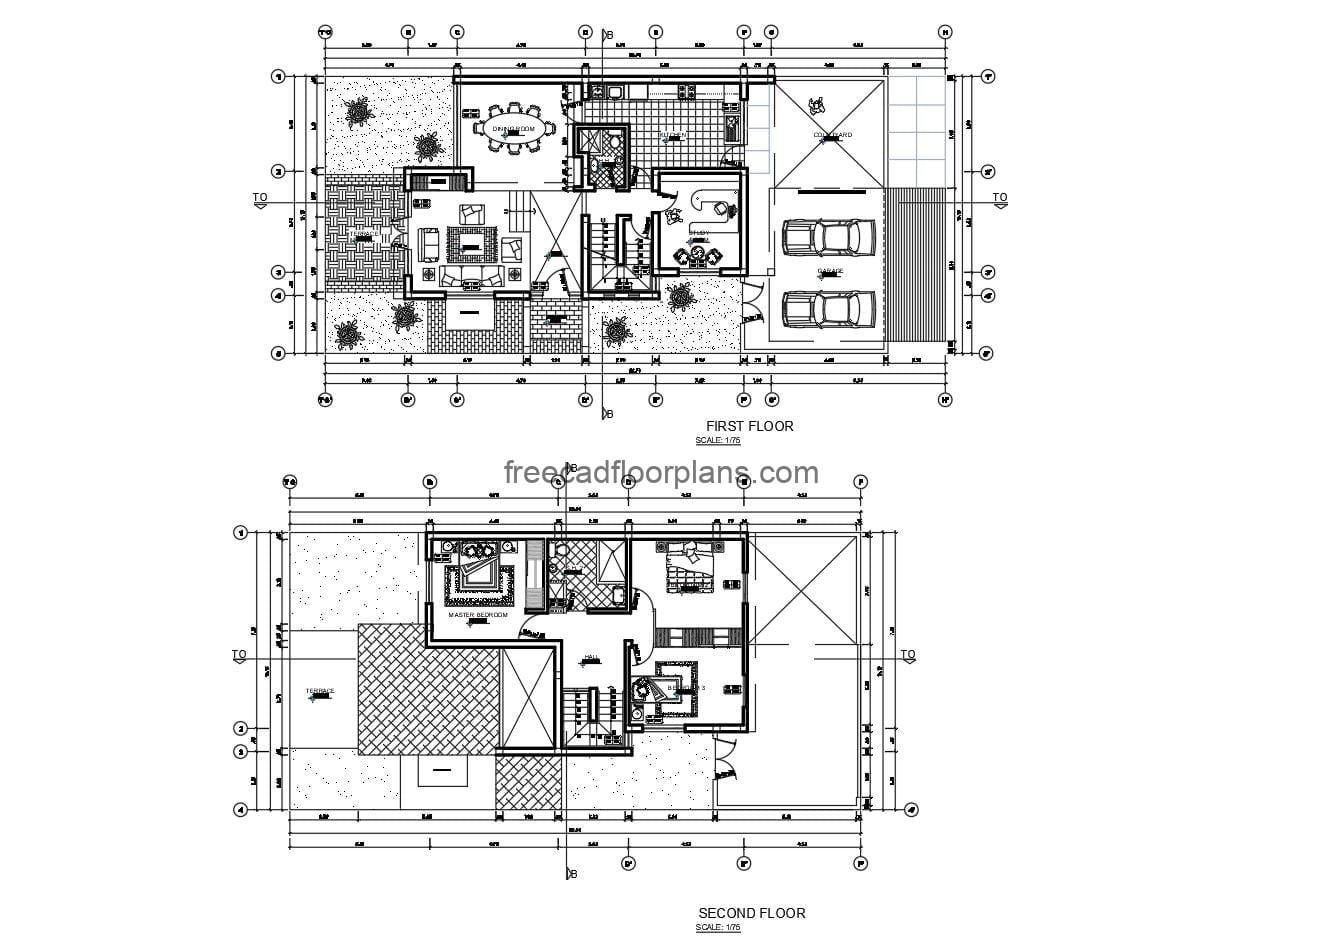 Complete autocad floorplans of a two-storey residence with basement for free download